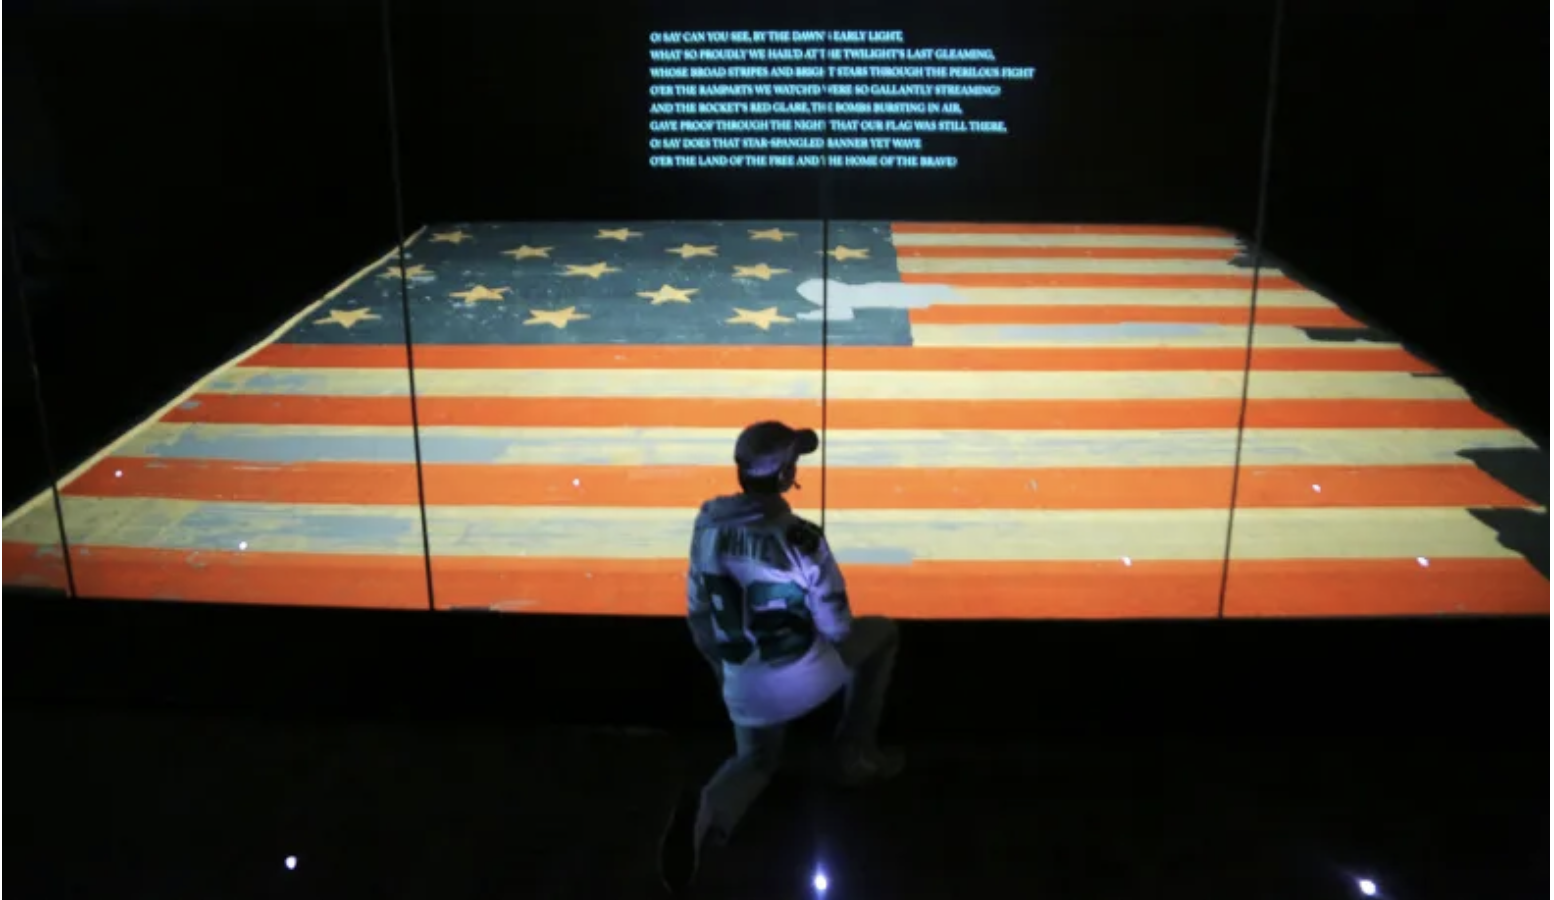 A boy views the flag known as "The Star Spangled Banner" at the Smithsonian Museum of American History in Washington,